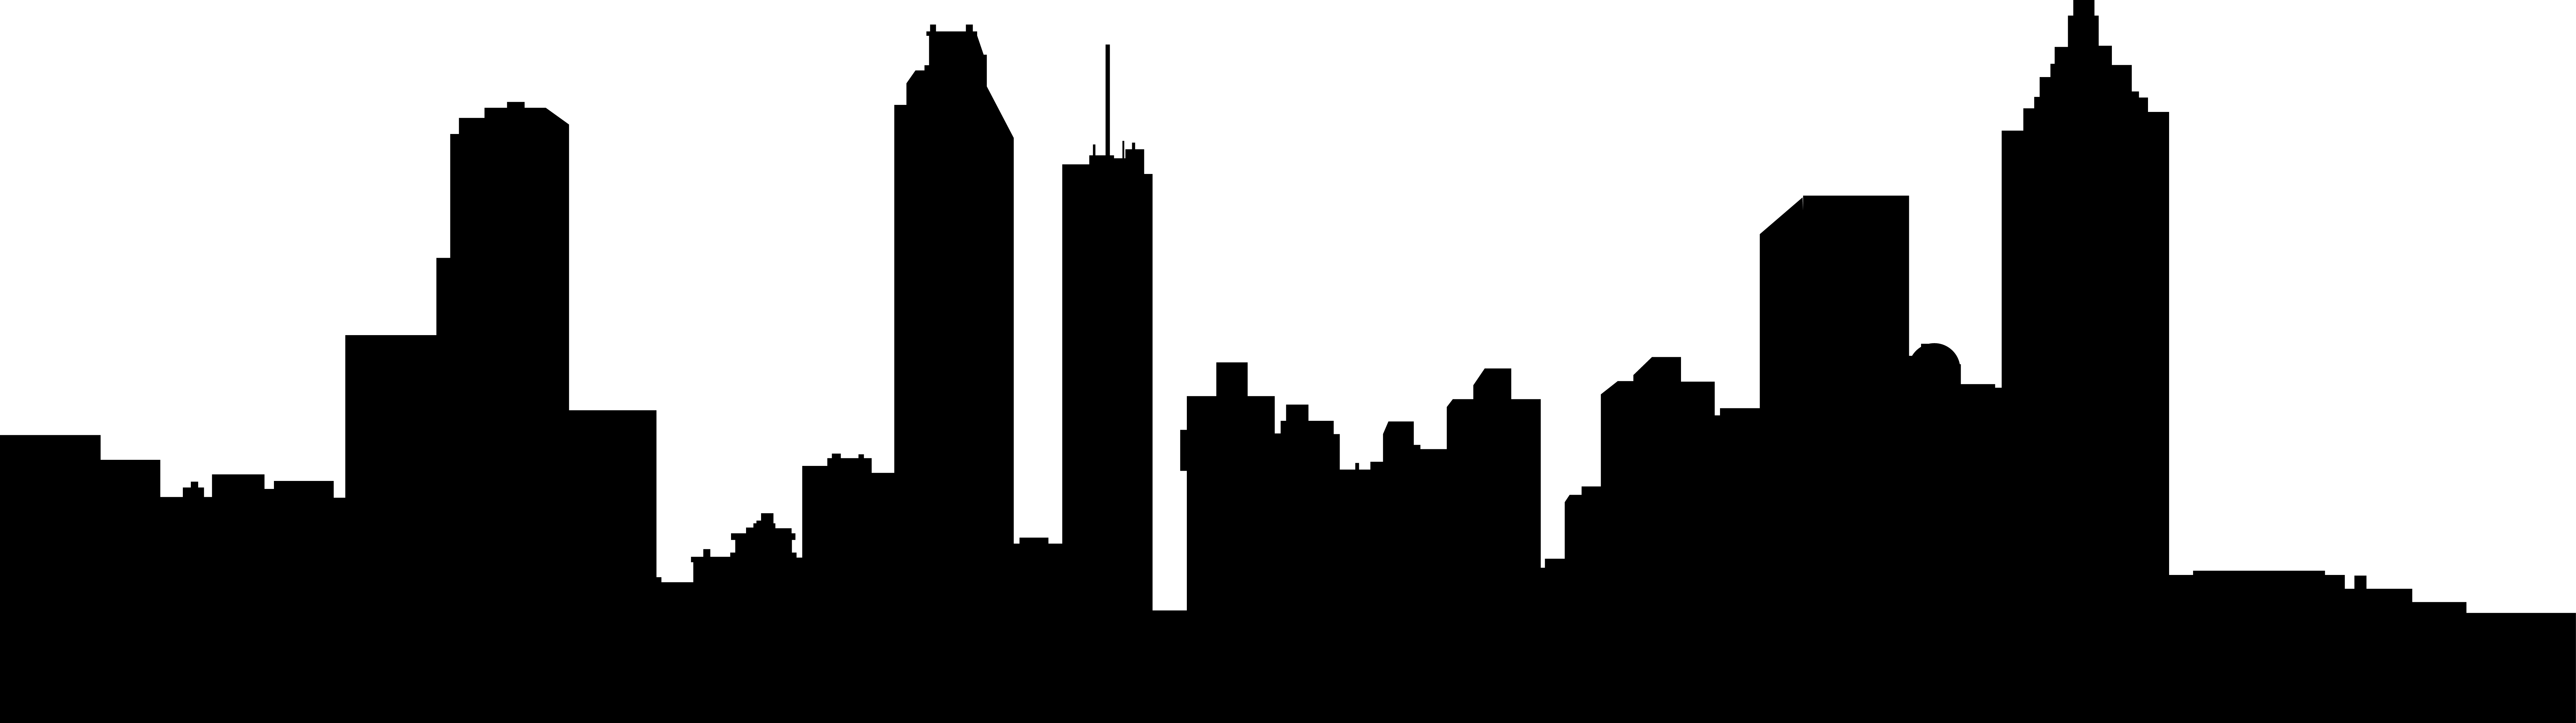 Skyline clipart. Image of chicago